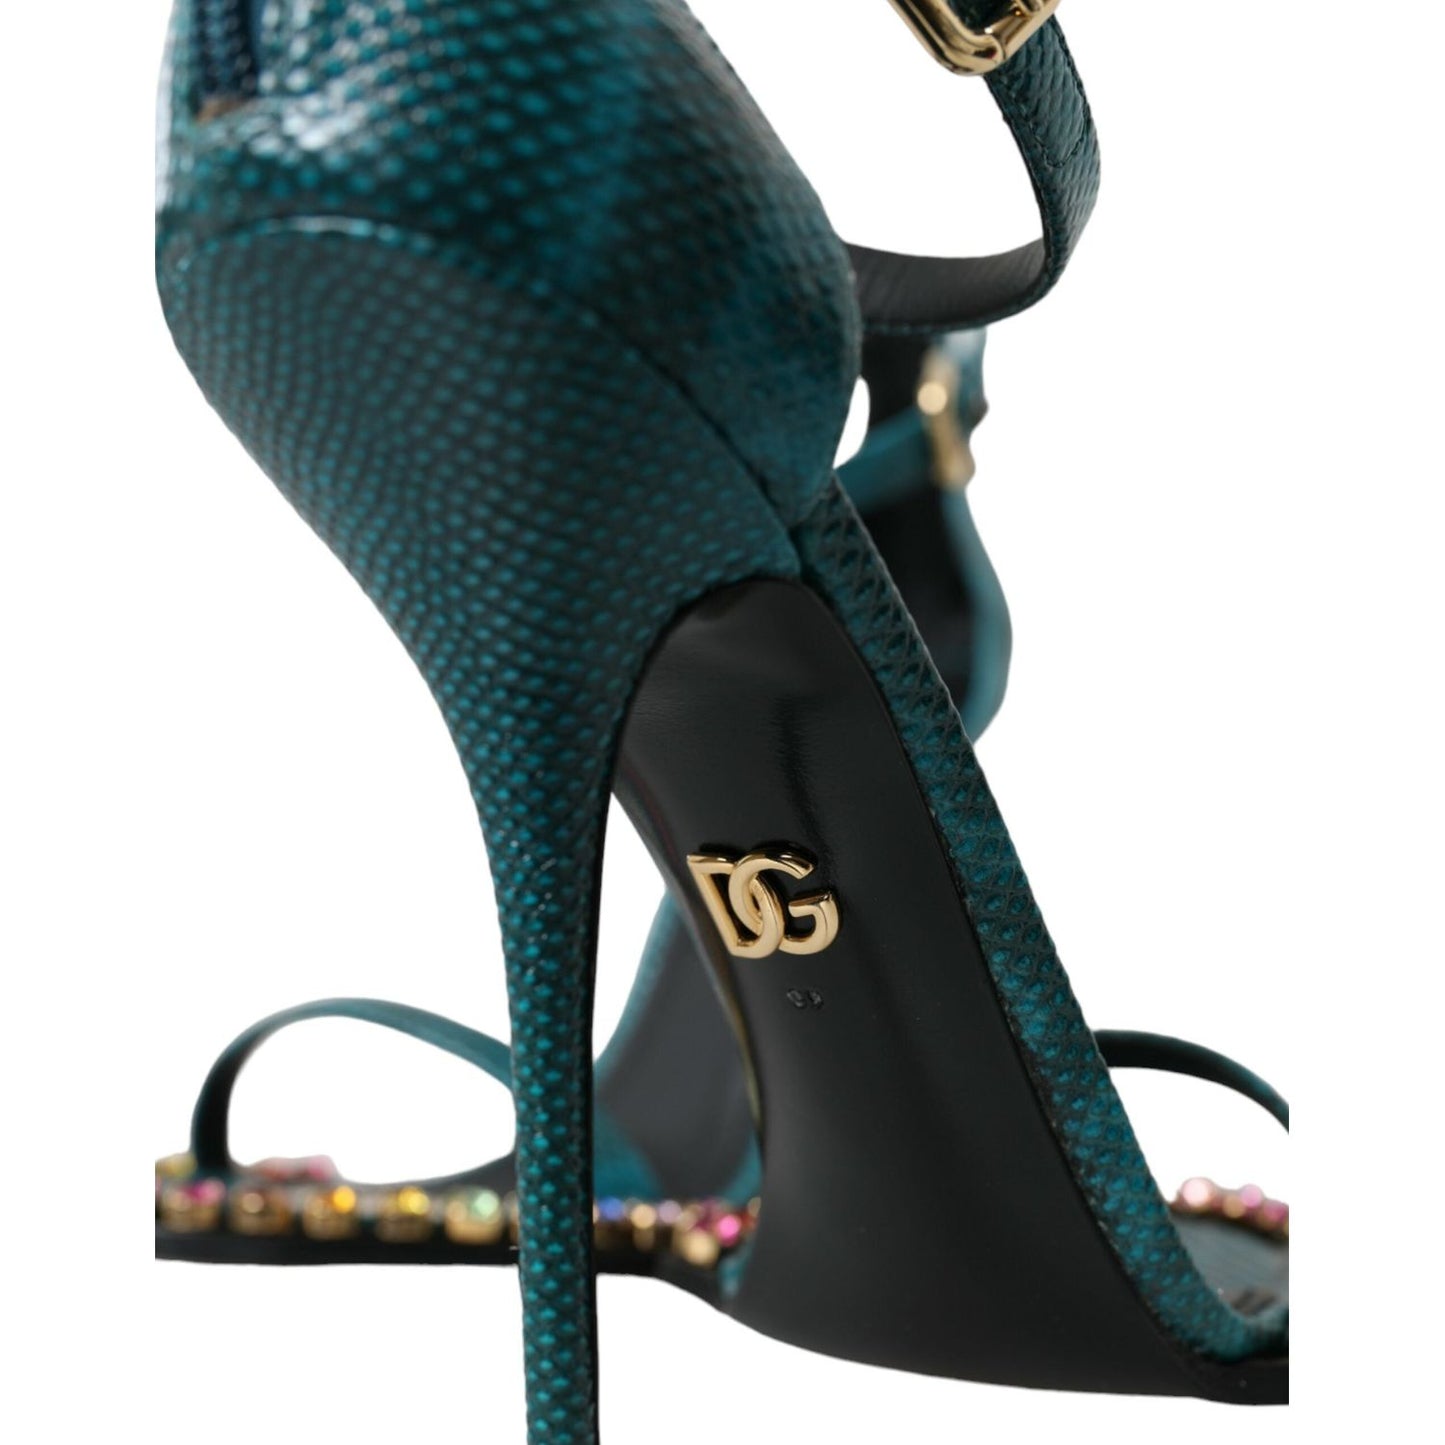 Dolce & Gabbana Blue Exotic Leather Crystal Sandals Shoes blue-exotic-leather-crystal-sandals-shoes